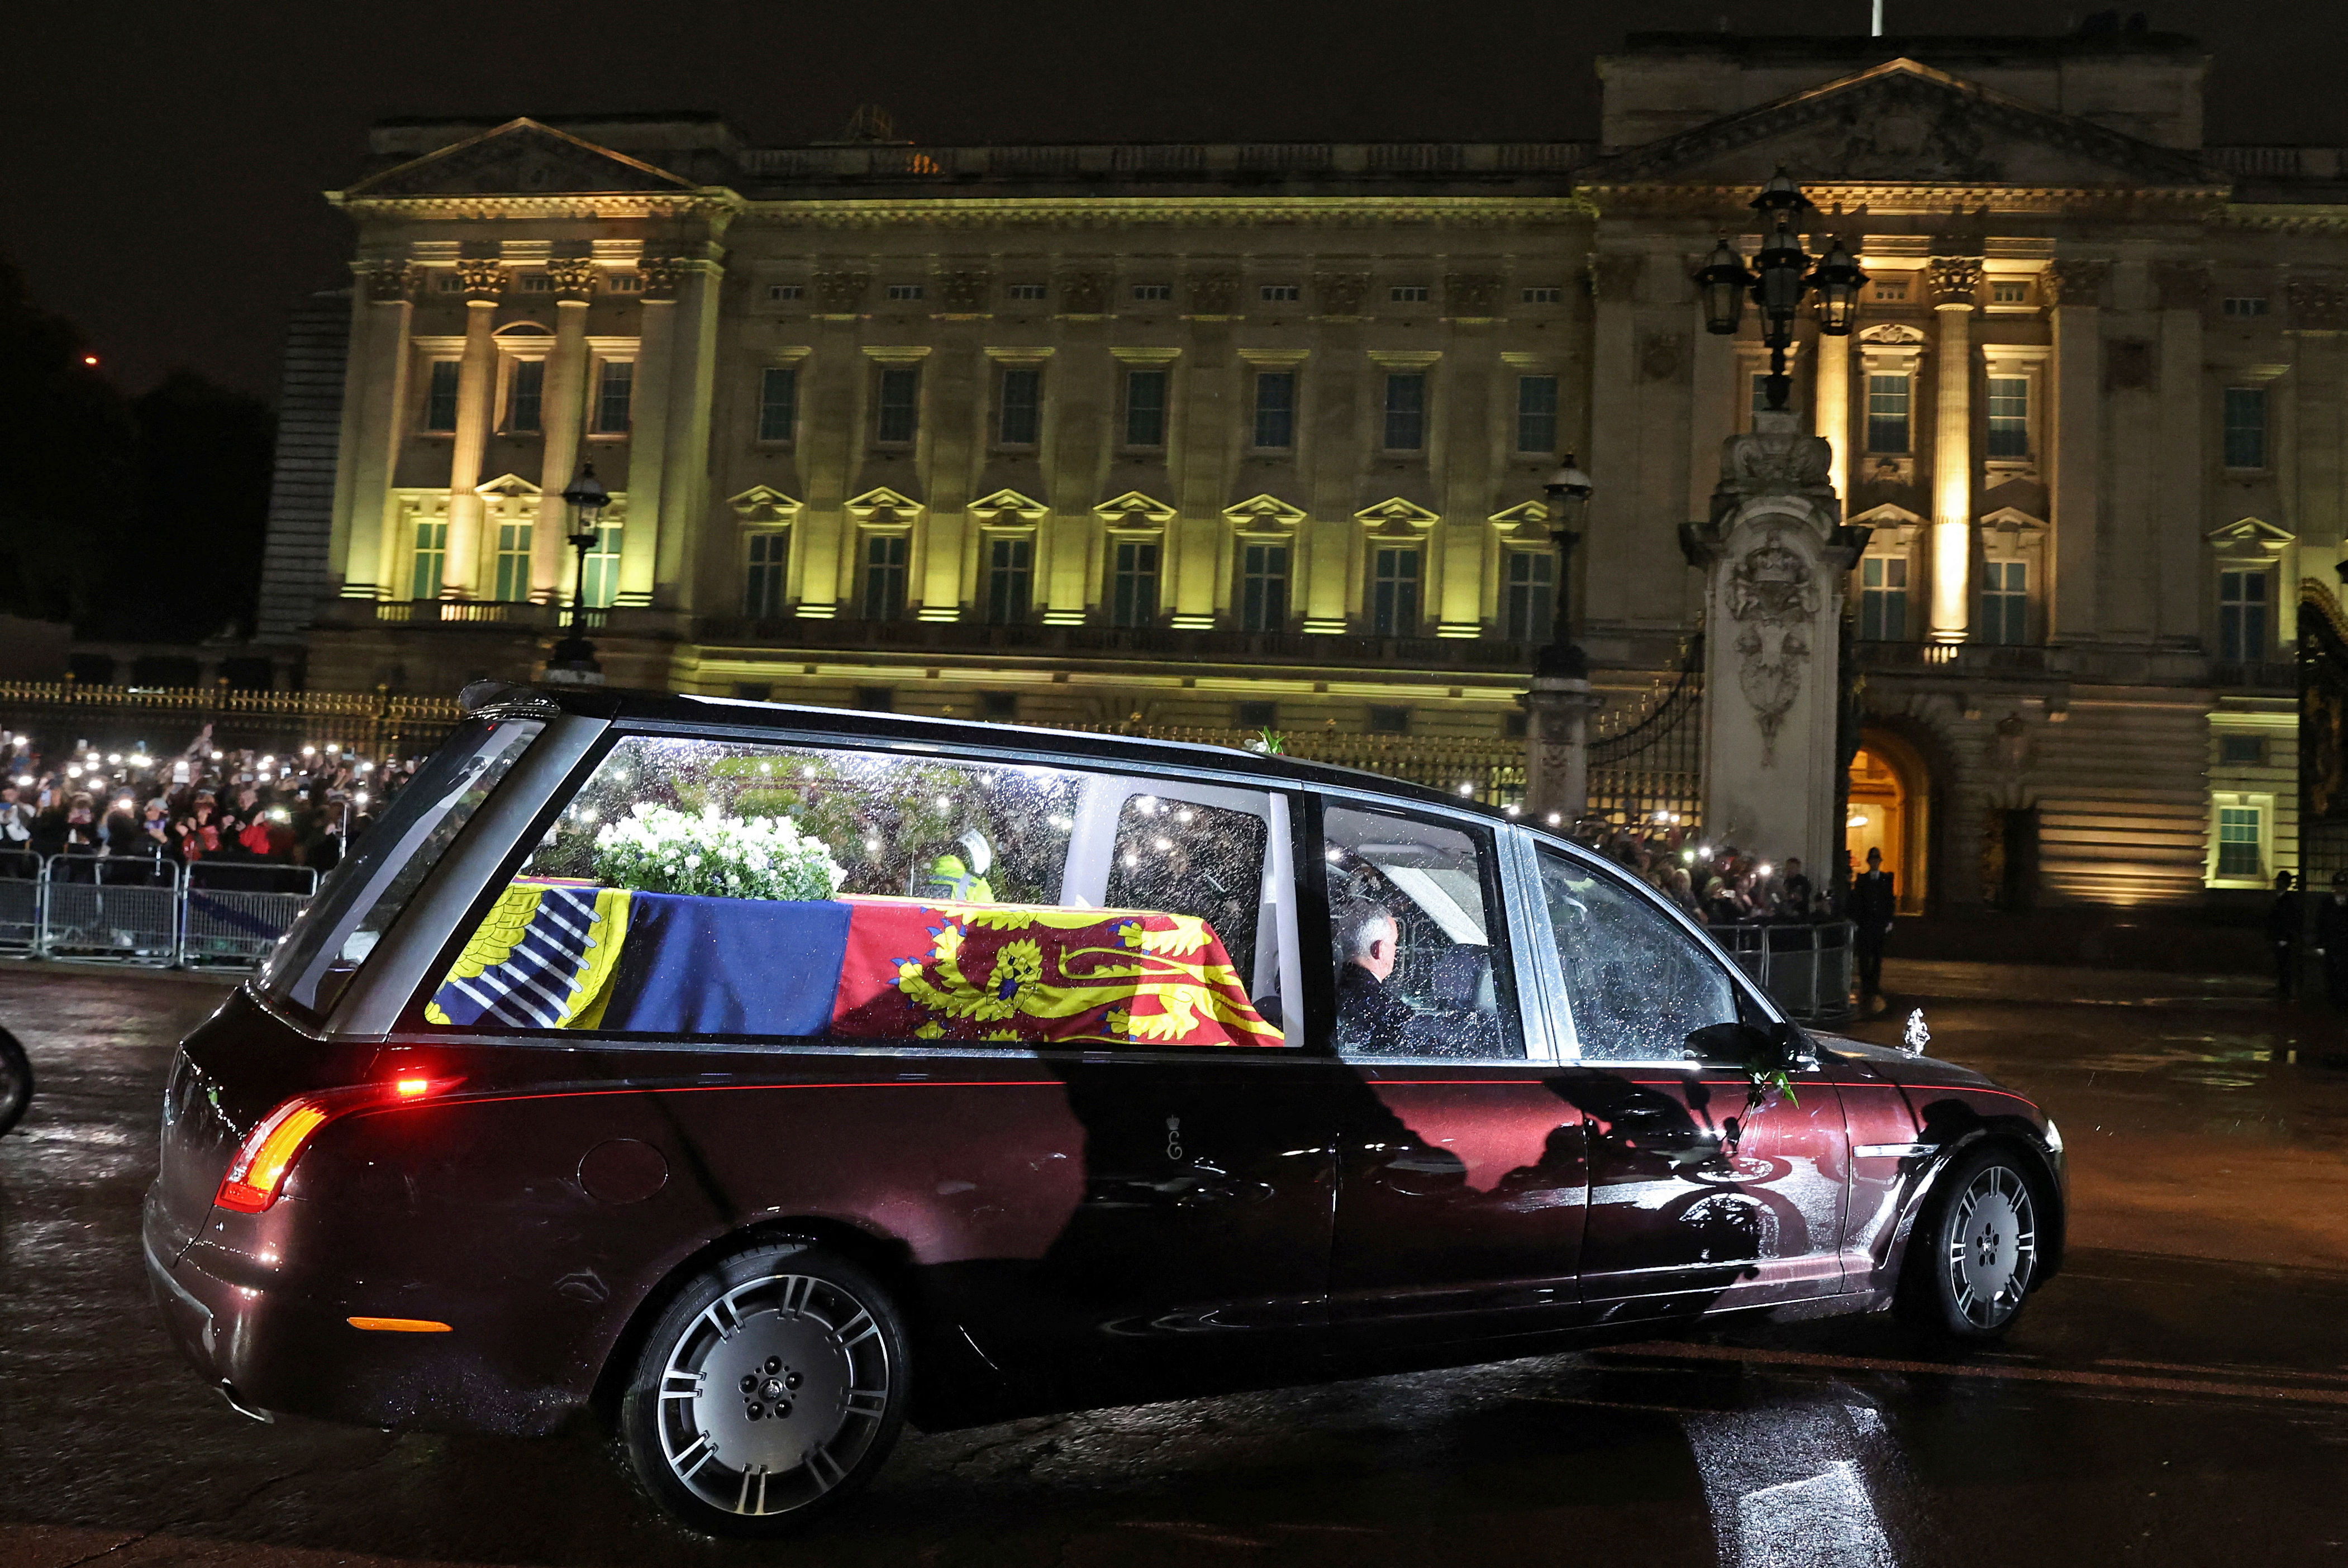 <p>A new state hearse featuring tall glass windows and interior lights -- which was designed in consultation with the late Queen Elizabeth II -- carried her coffin to Buckingham Palace in London on Sept. 13, 2022, after it arrived via plane from Scotland. King Charles III, his siblings and their children and spouses were waiting inside the palace gates to greet the cortege of vehicles before Her Majesty's body was taken to the Bow Room, where it would remain overnight.</p>